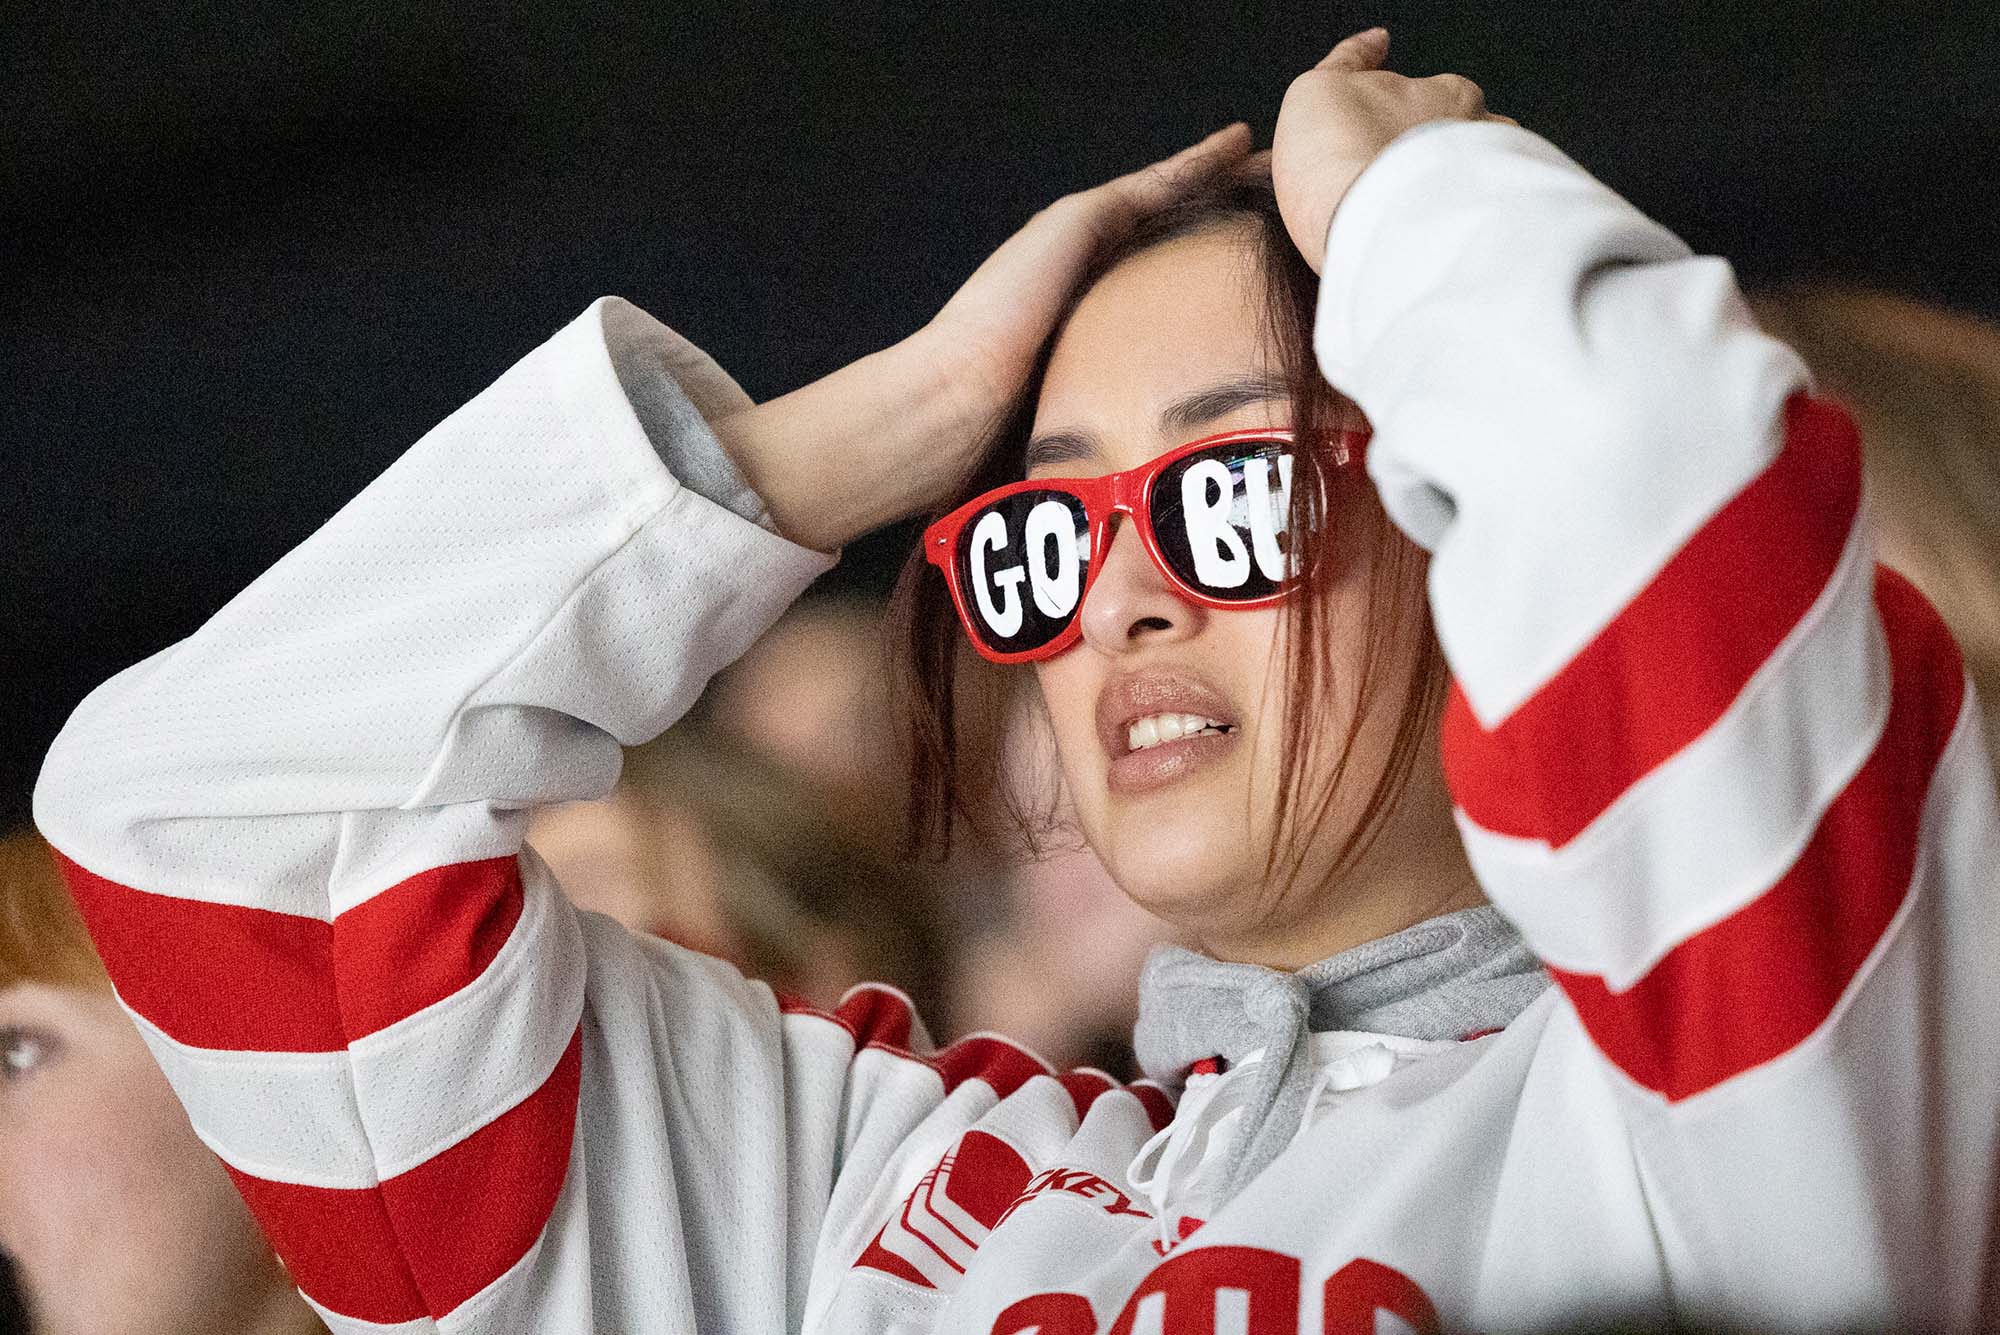 Photo: Fans react to the overtime game of college hockey for BU's Beanpot. A Asian woman wearing glasses that say GO BU holds her head in defeat.